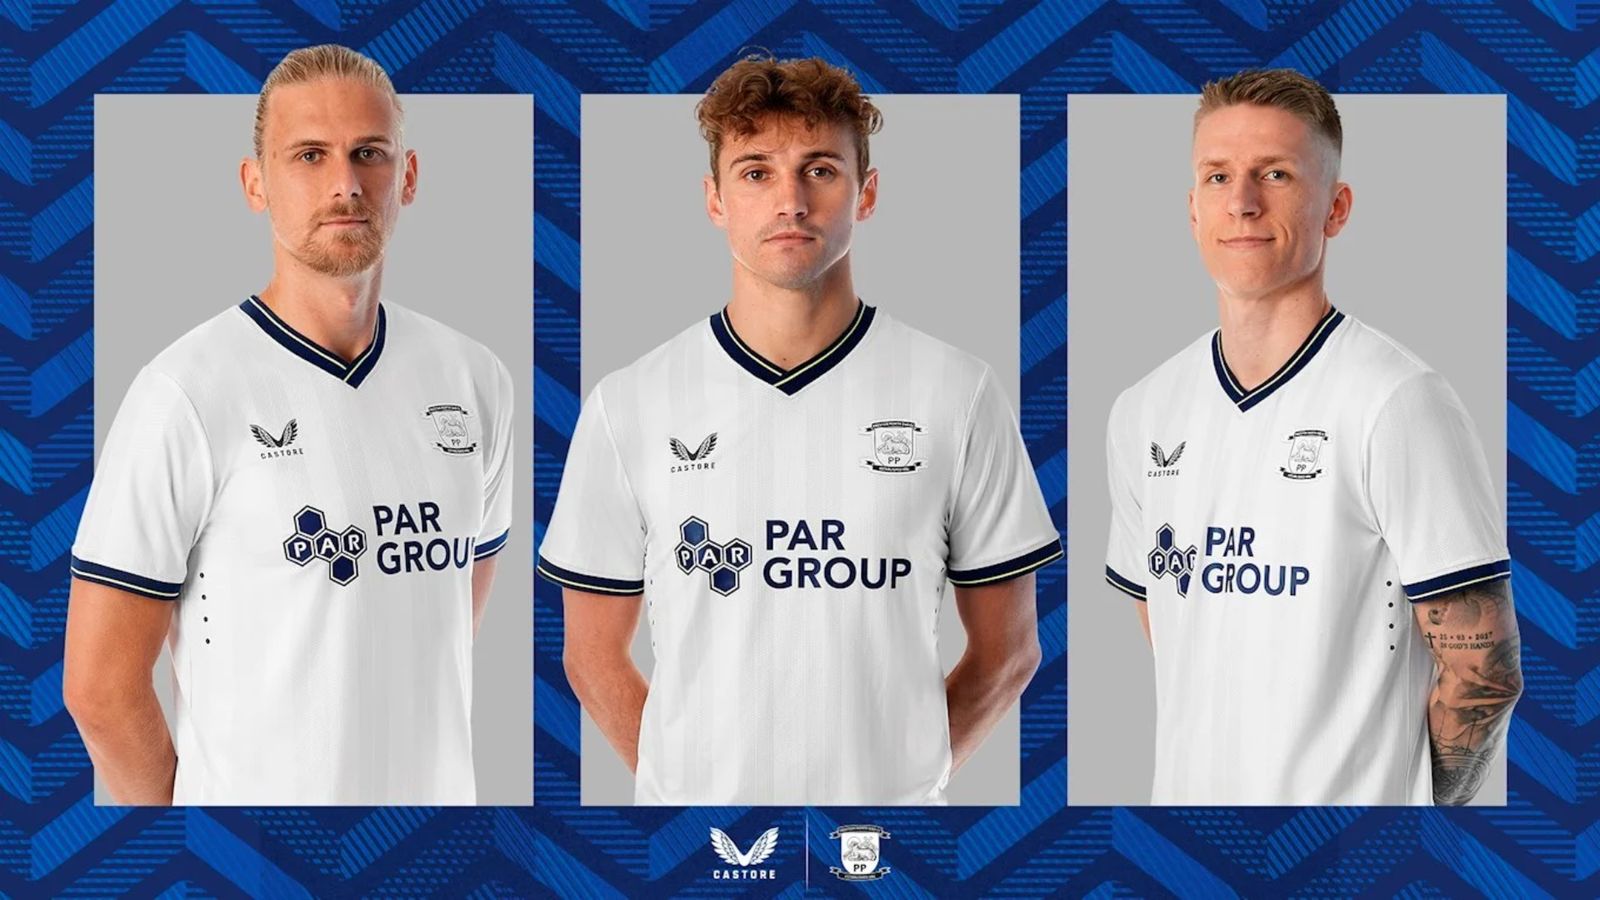 Preston North End Castore Home Kit product image of a white kit worn by players featuring navy collars and sleeves.